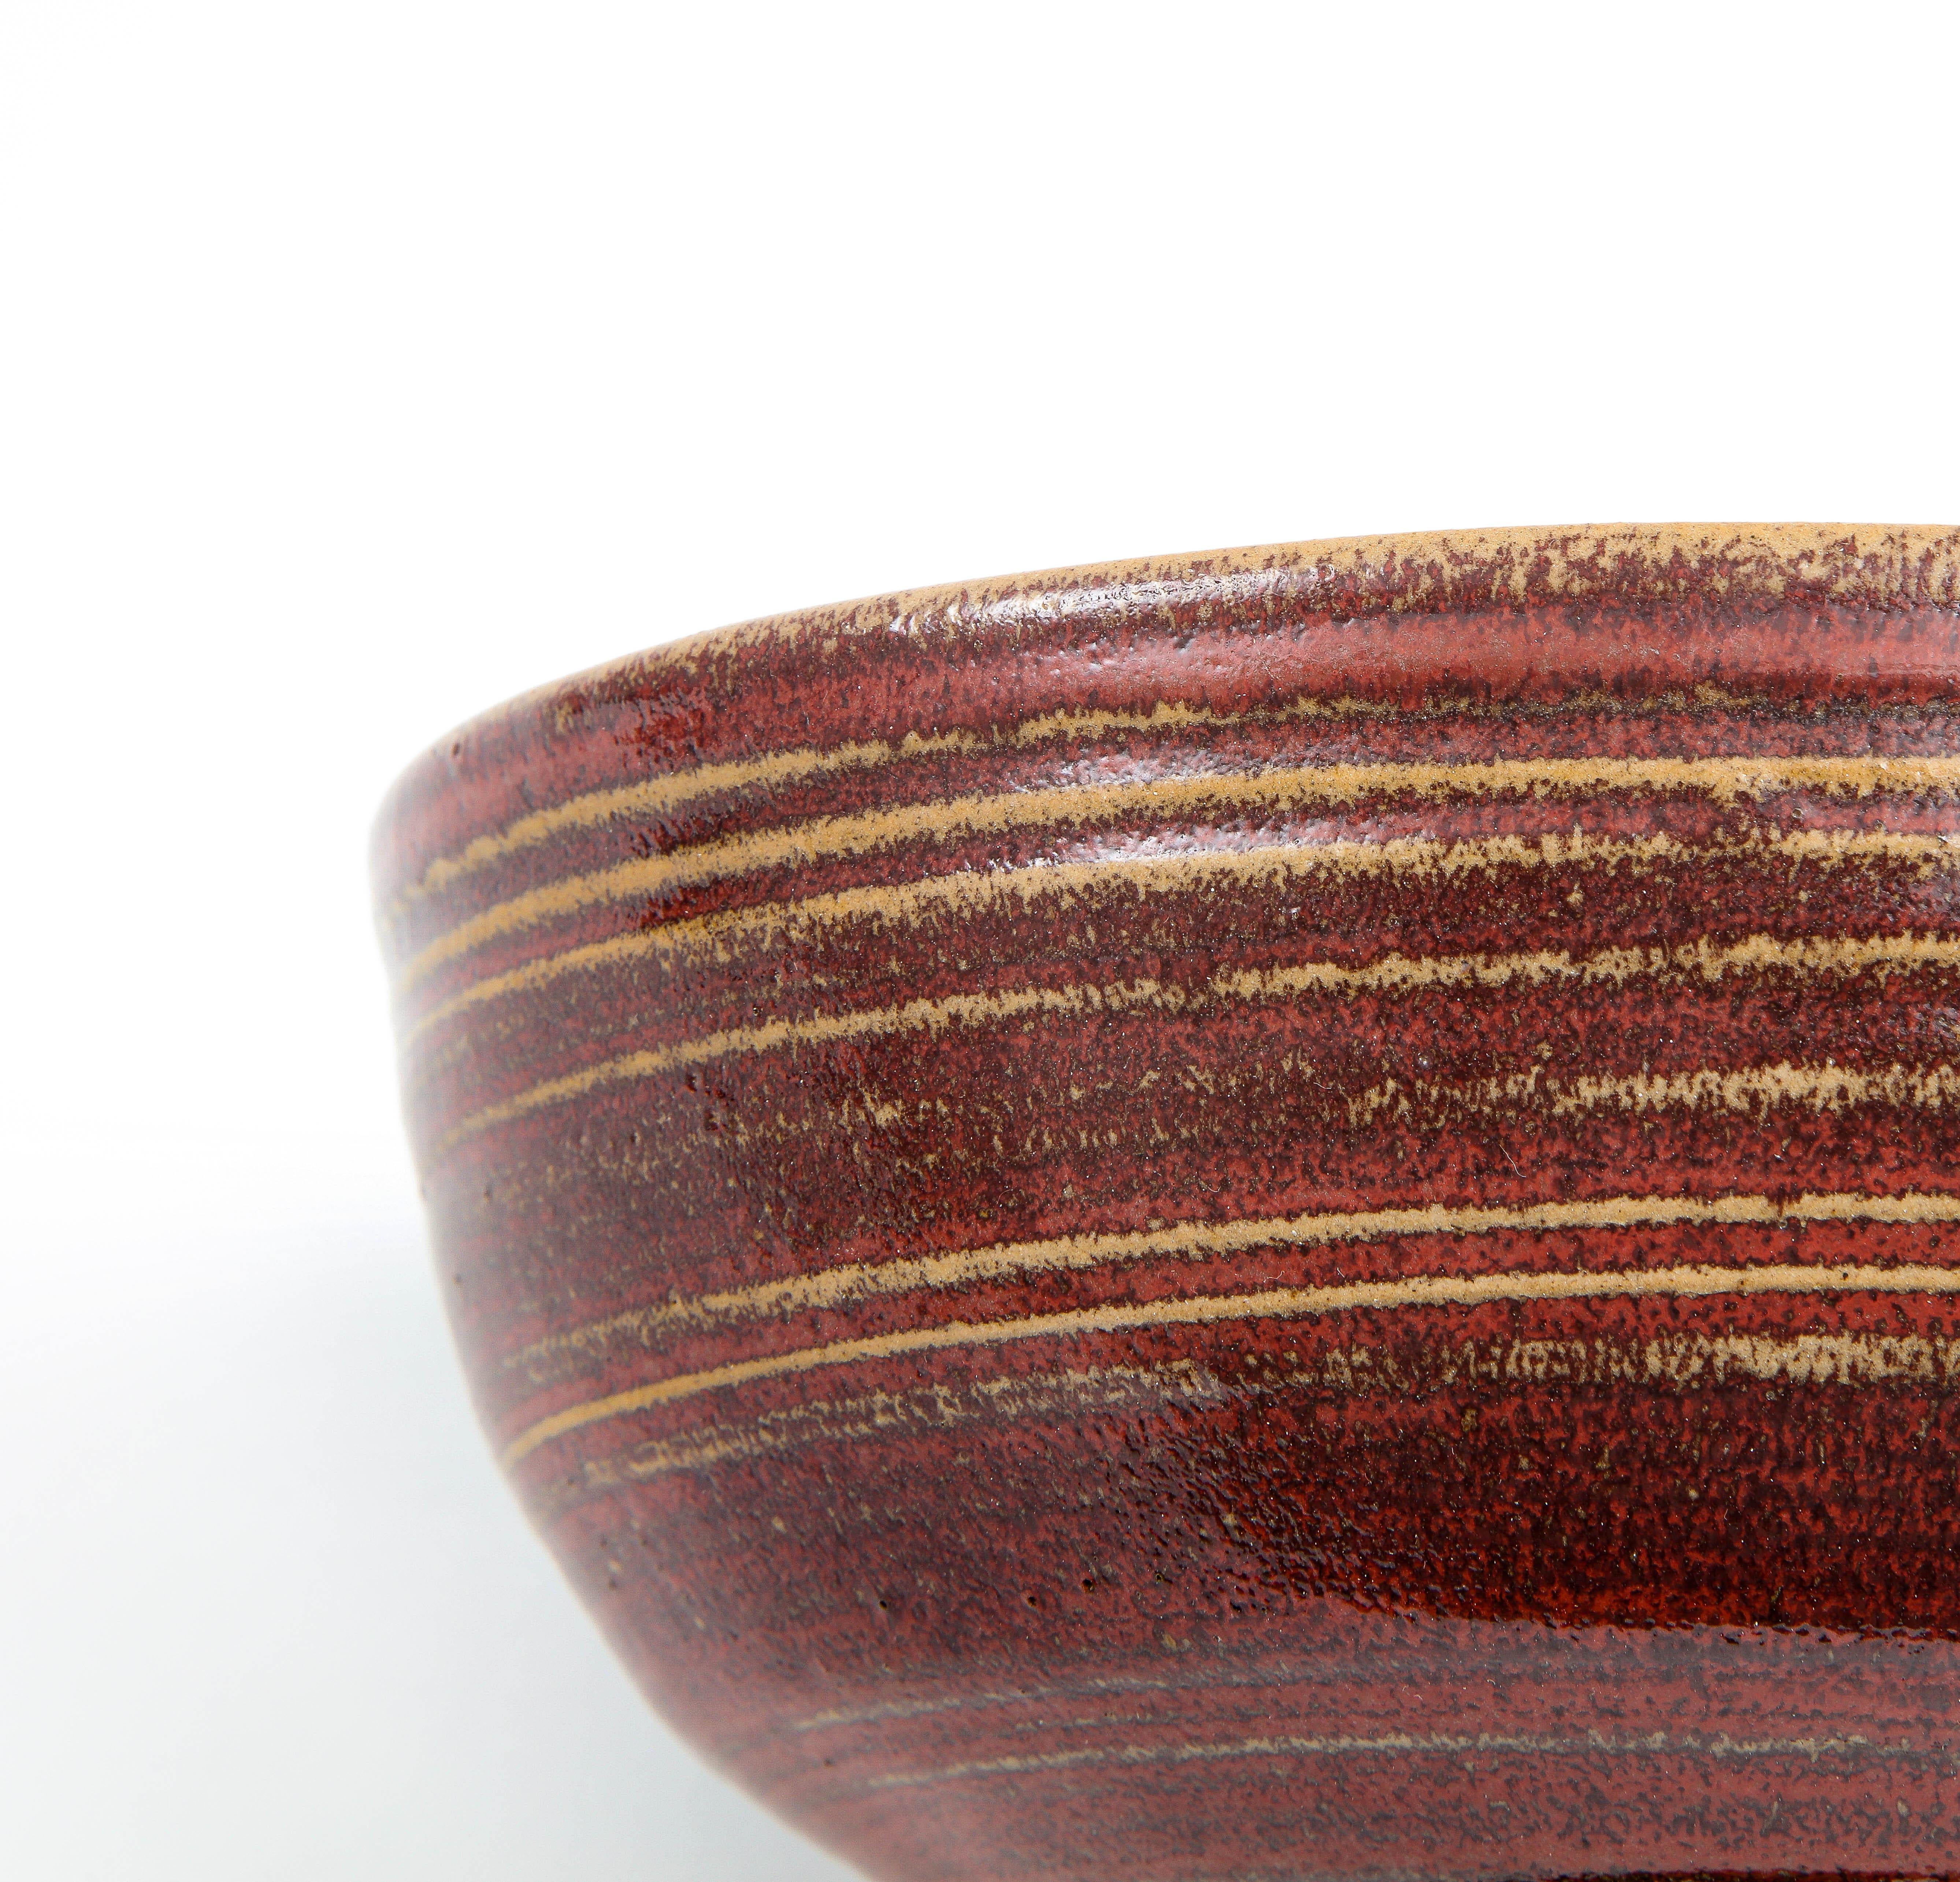 A rustic stoneware bowl on a pedestal. Rich oxblood glaze with hand-drawn lines complementing its simple organic form. The base as little cutouts that lighten the overall structure. Unsigned.